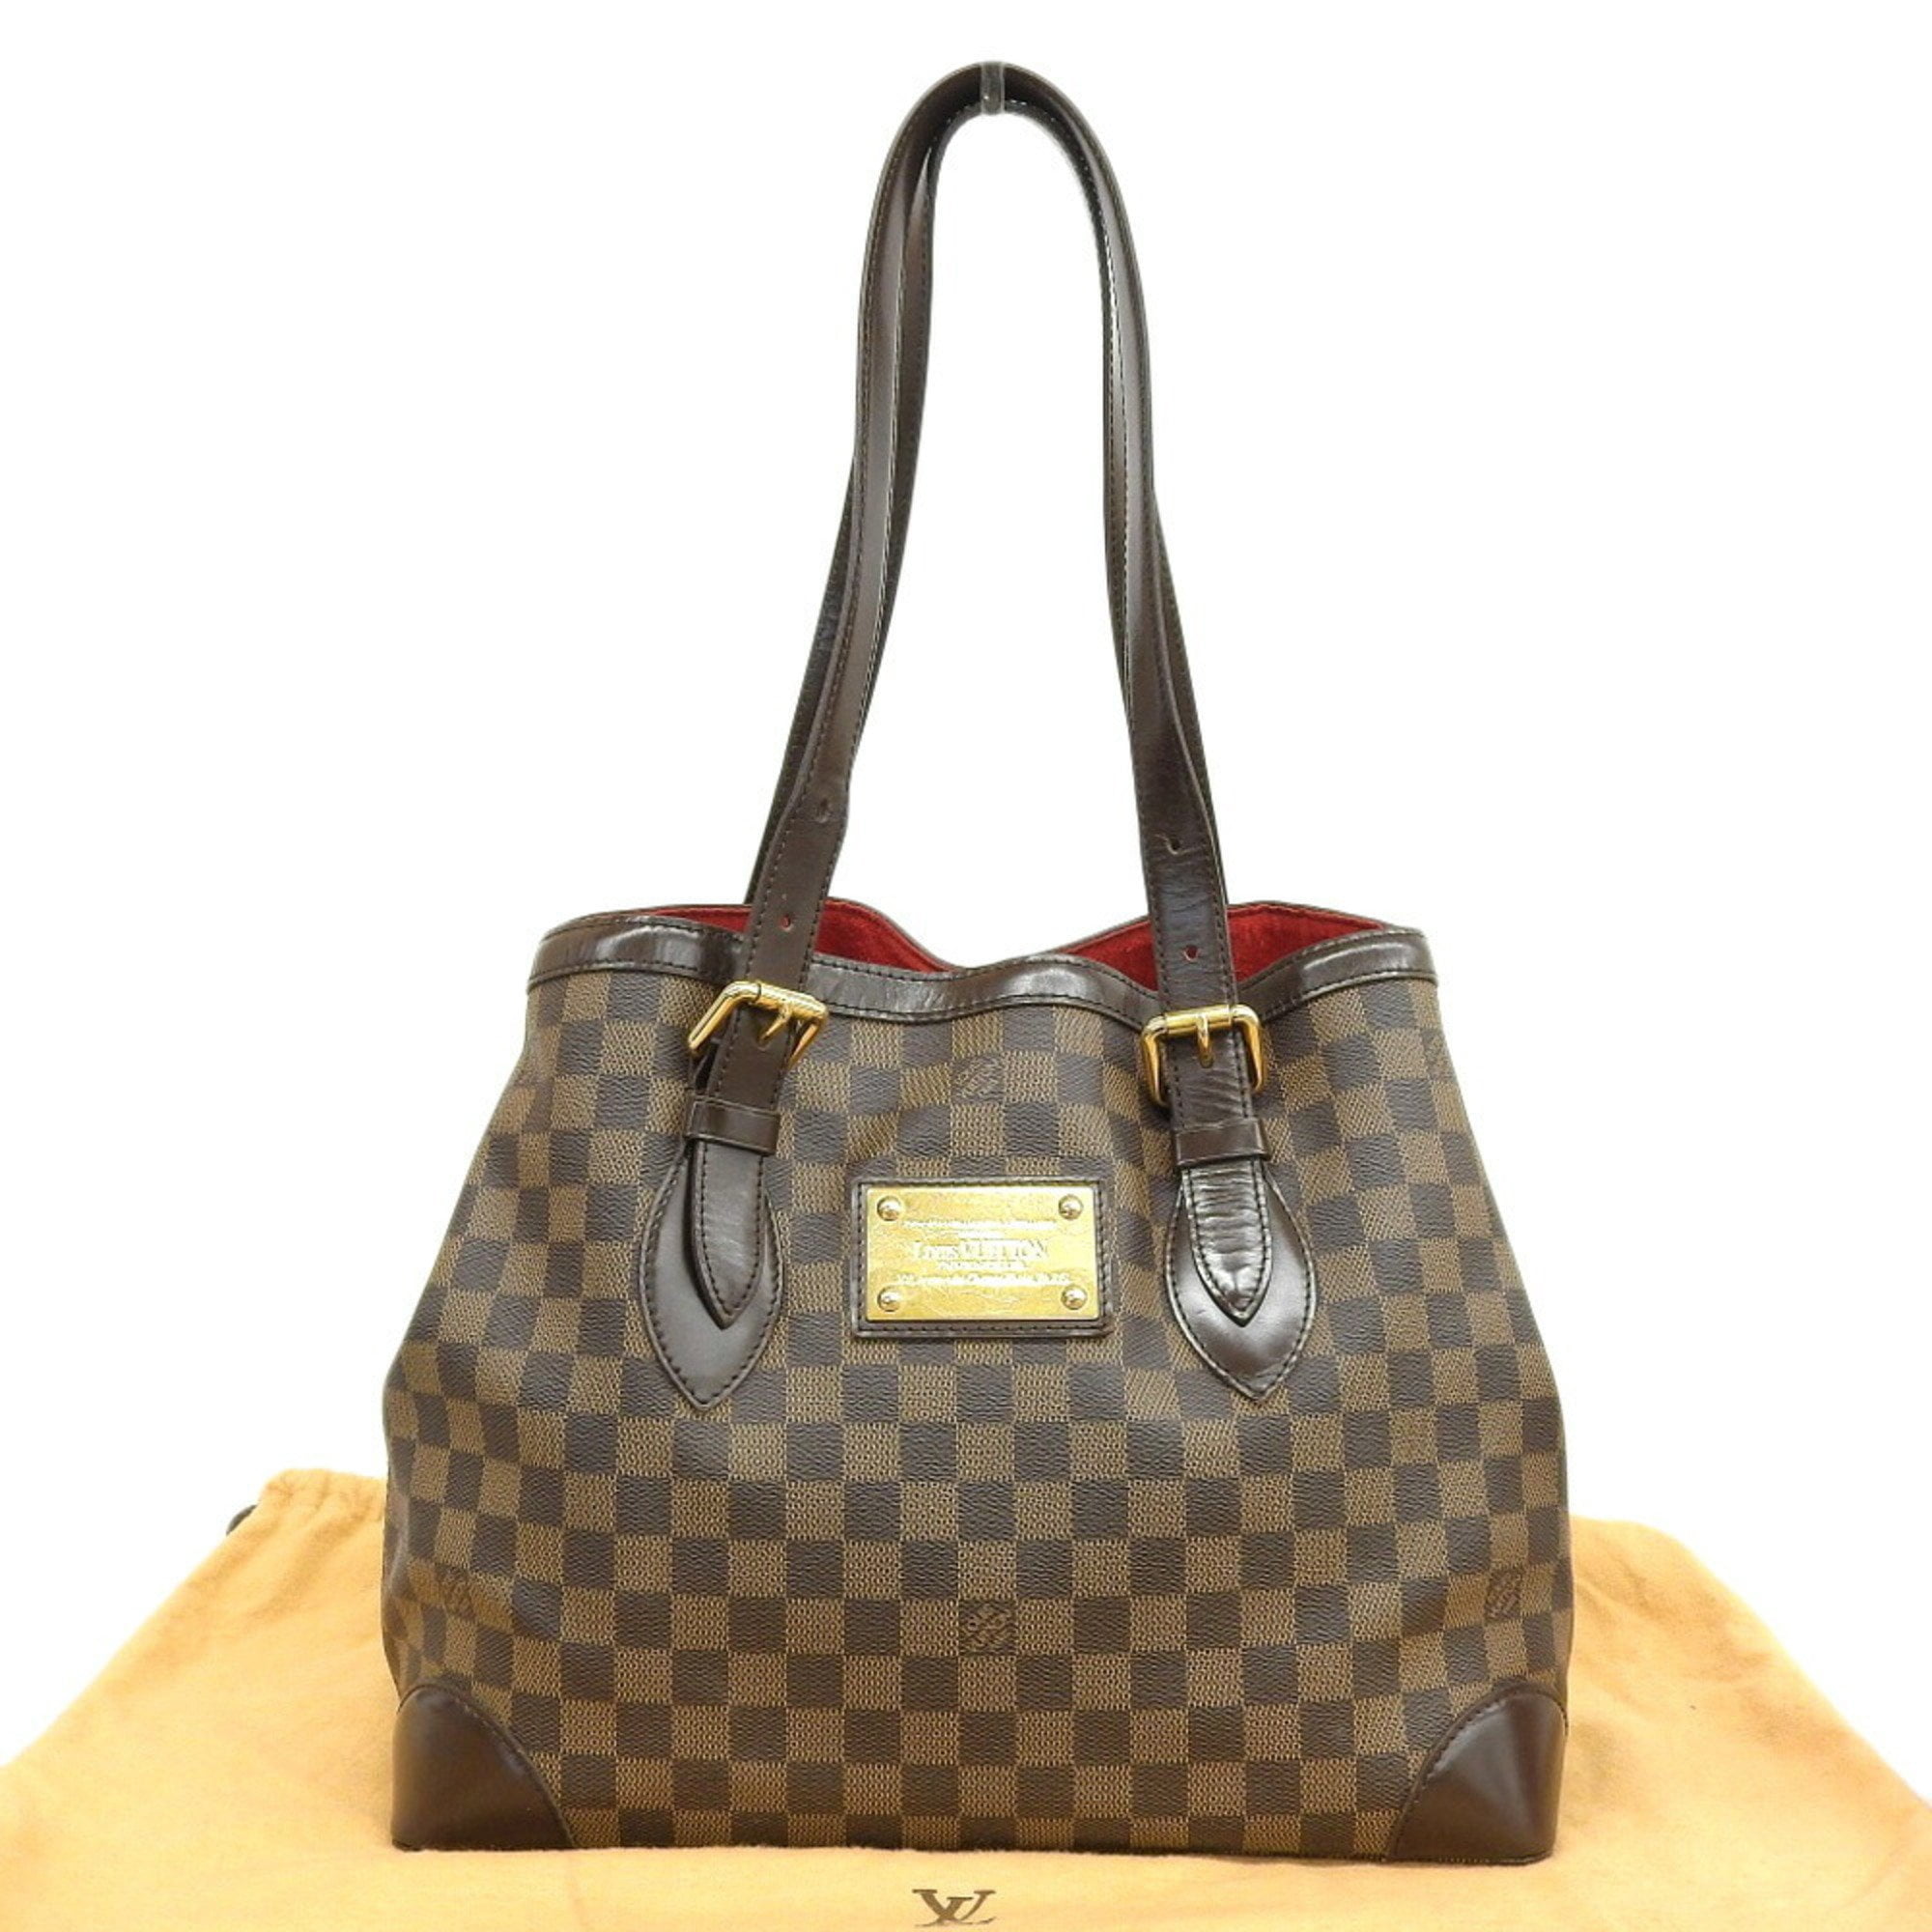 Authenticated Used Louis Vuitton LOUIS VUITTON Damier Hampstead GM Tote Bag  N51203 